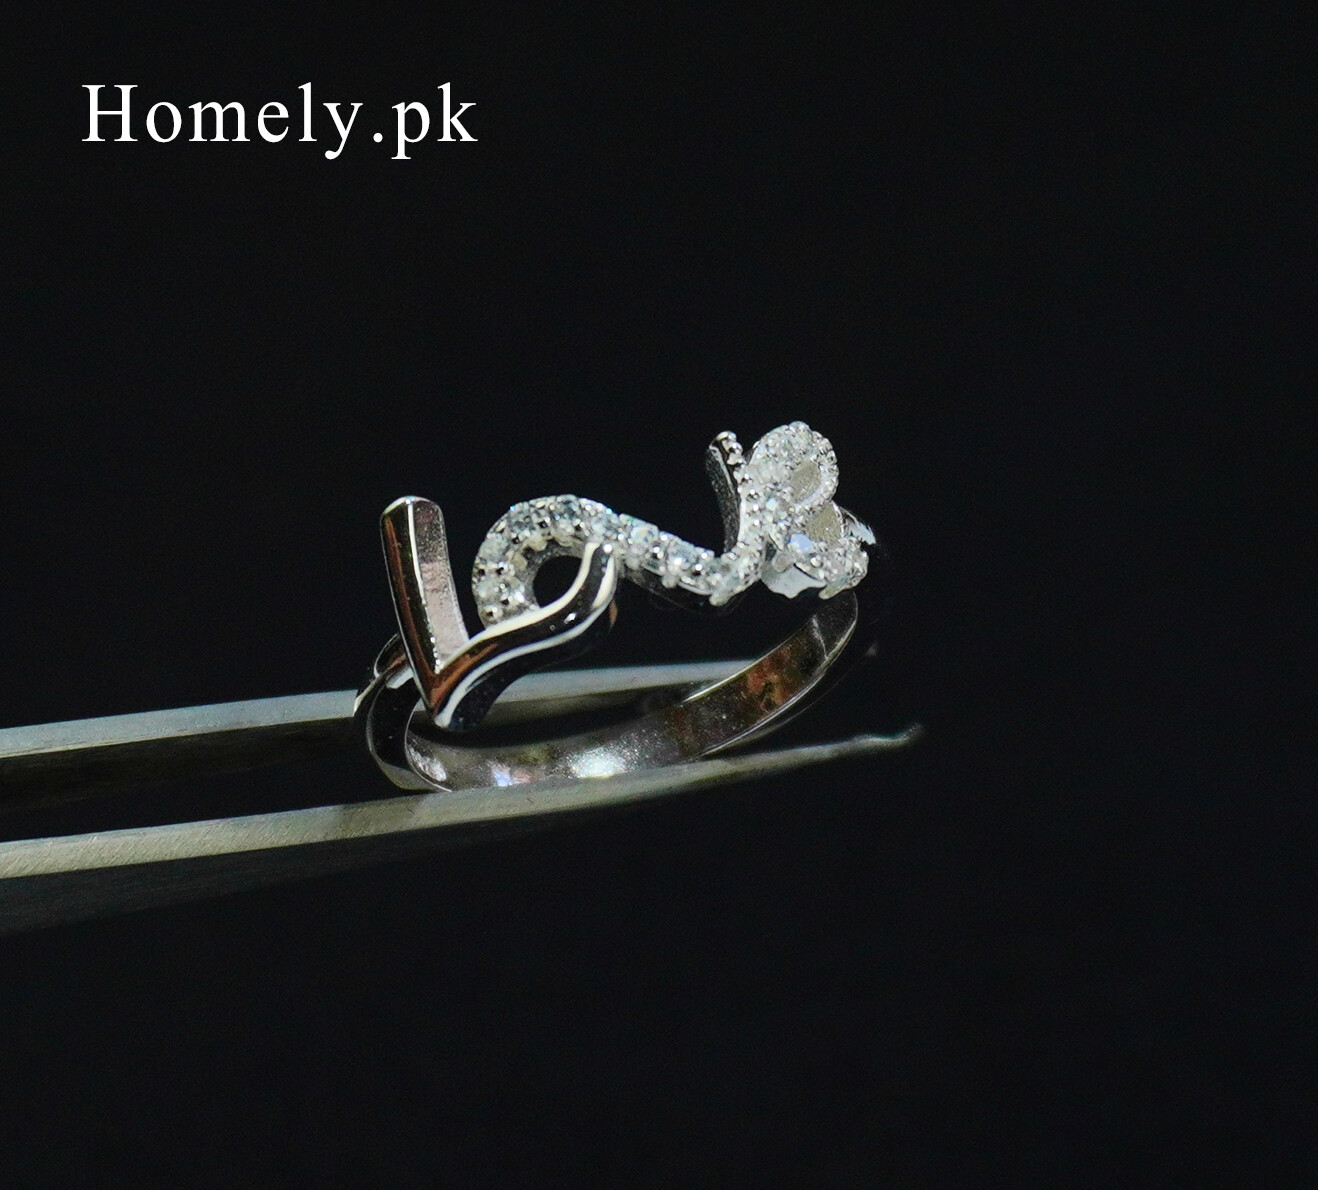 Superlative Typical Red Stone Pure Chandi Ring - Homely.pk